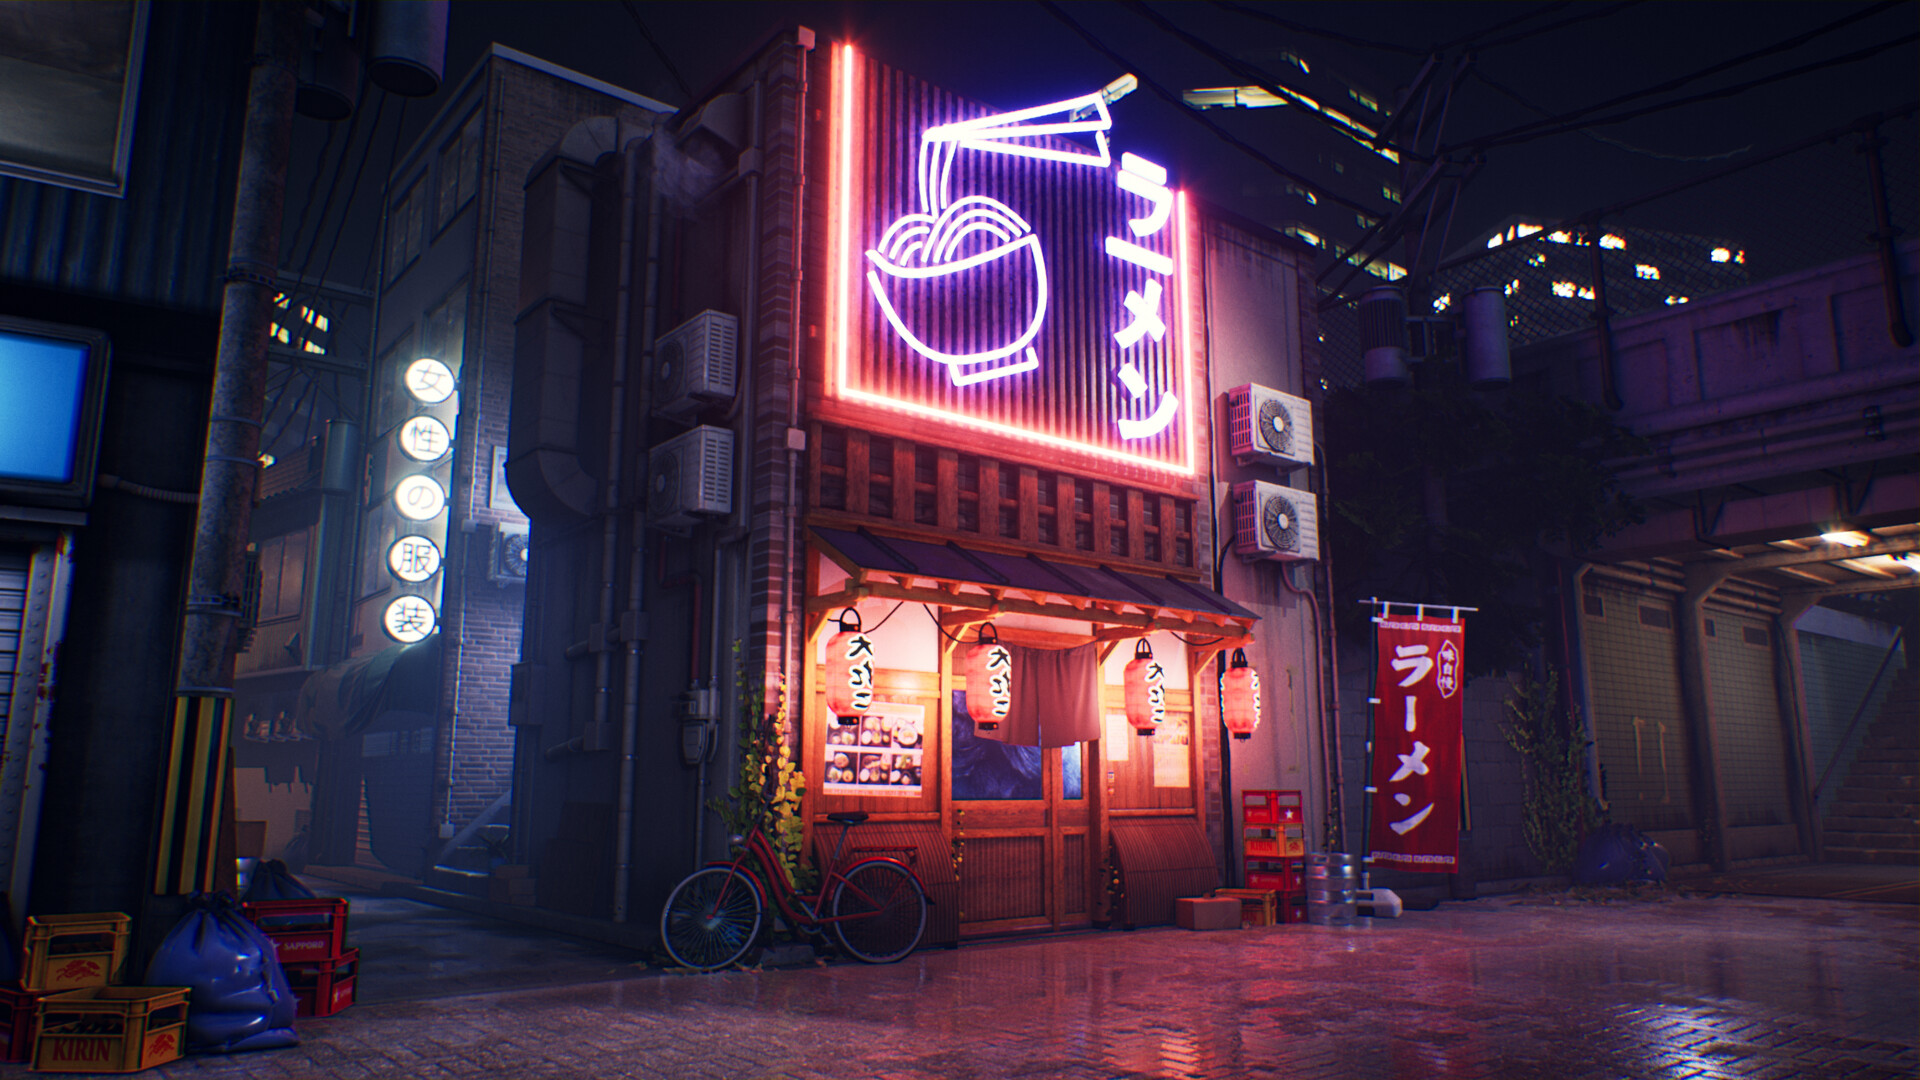 General 1920x1080 cafe Japan neon glowing bicycle store front building city street digital art